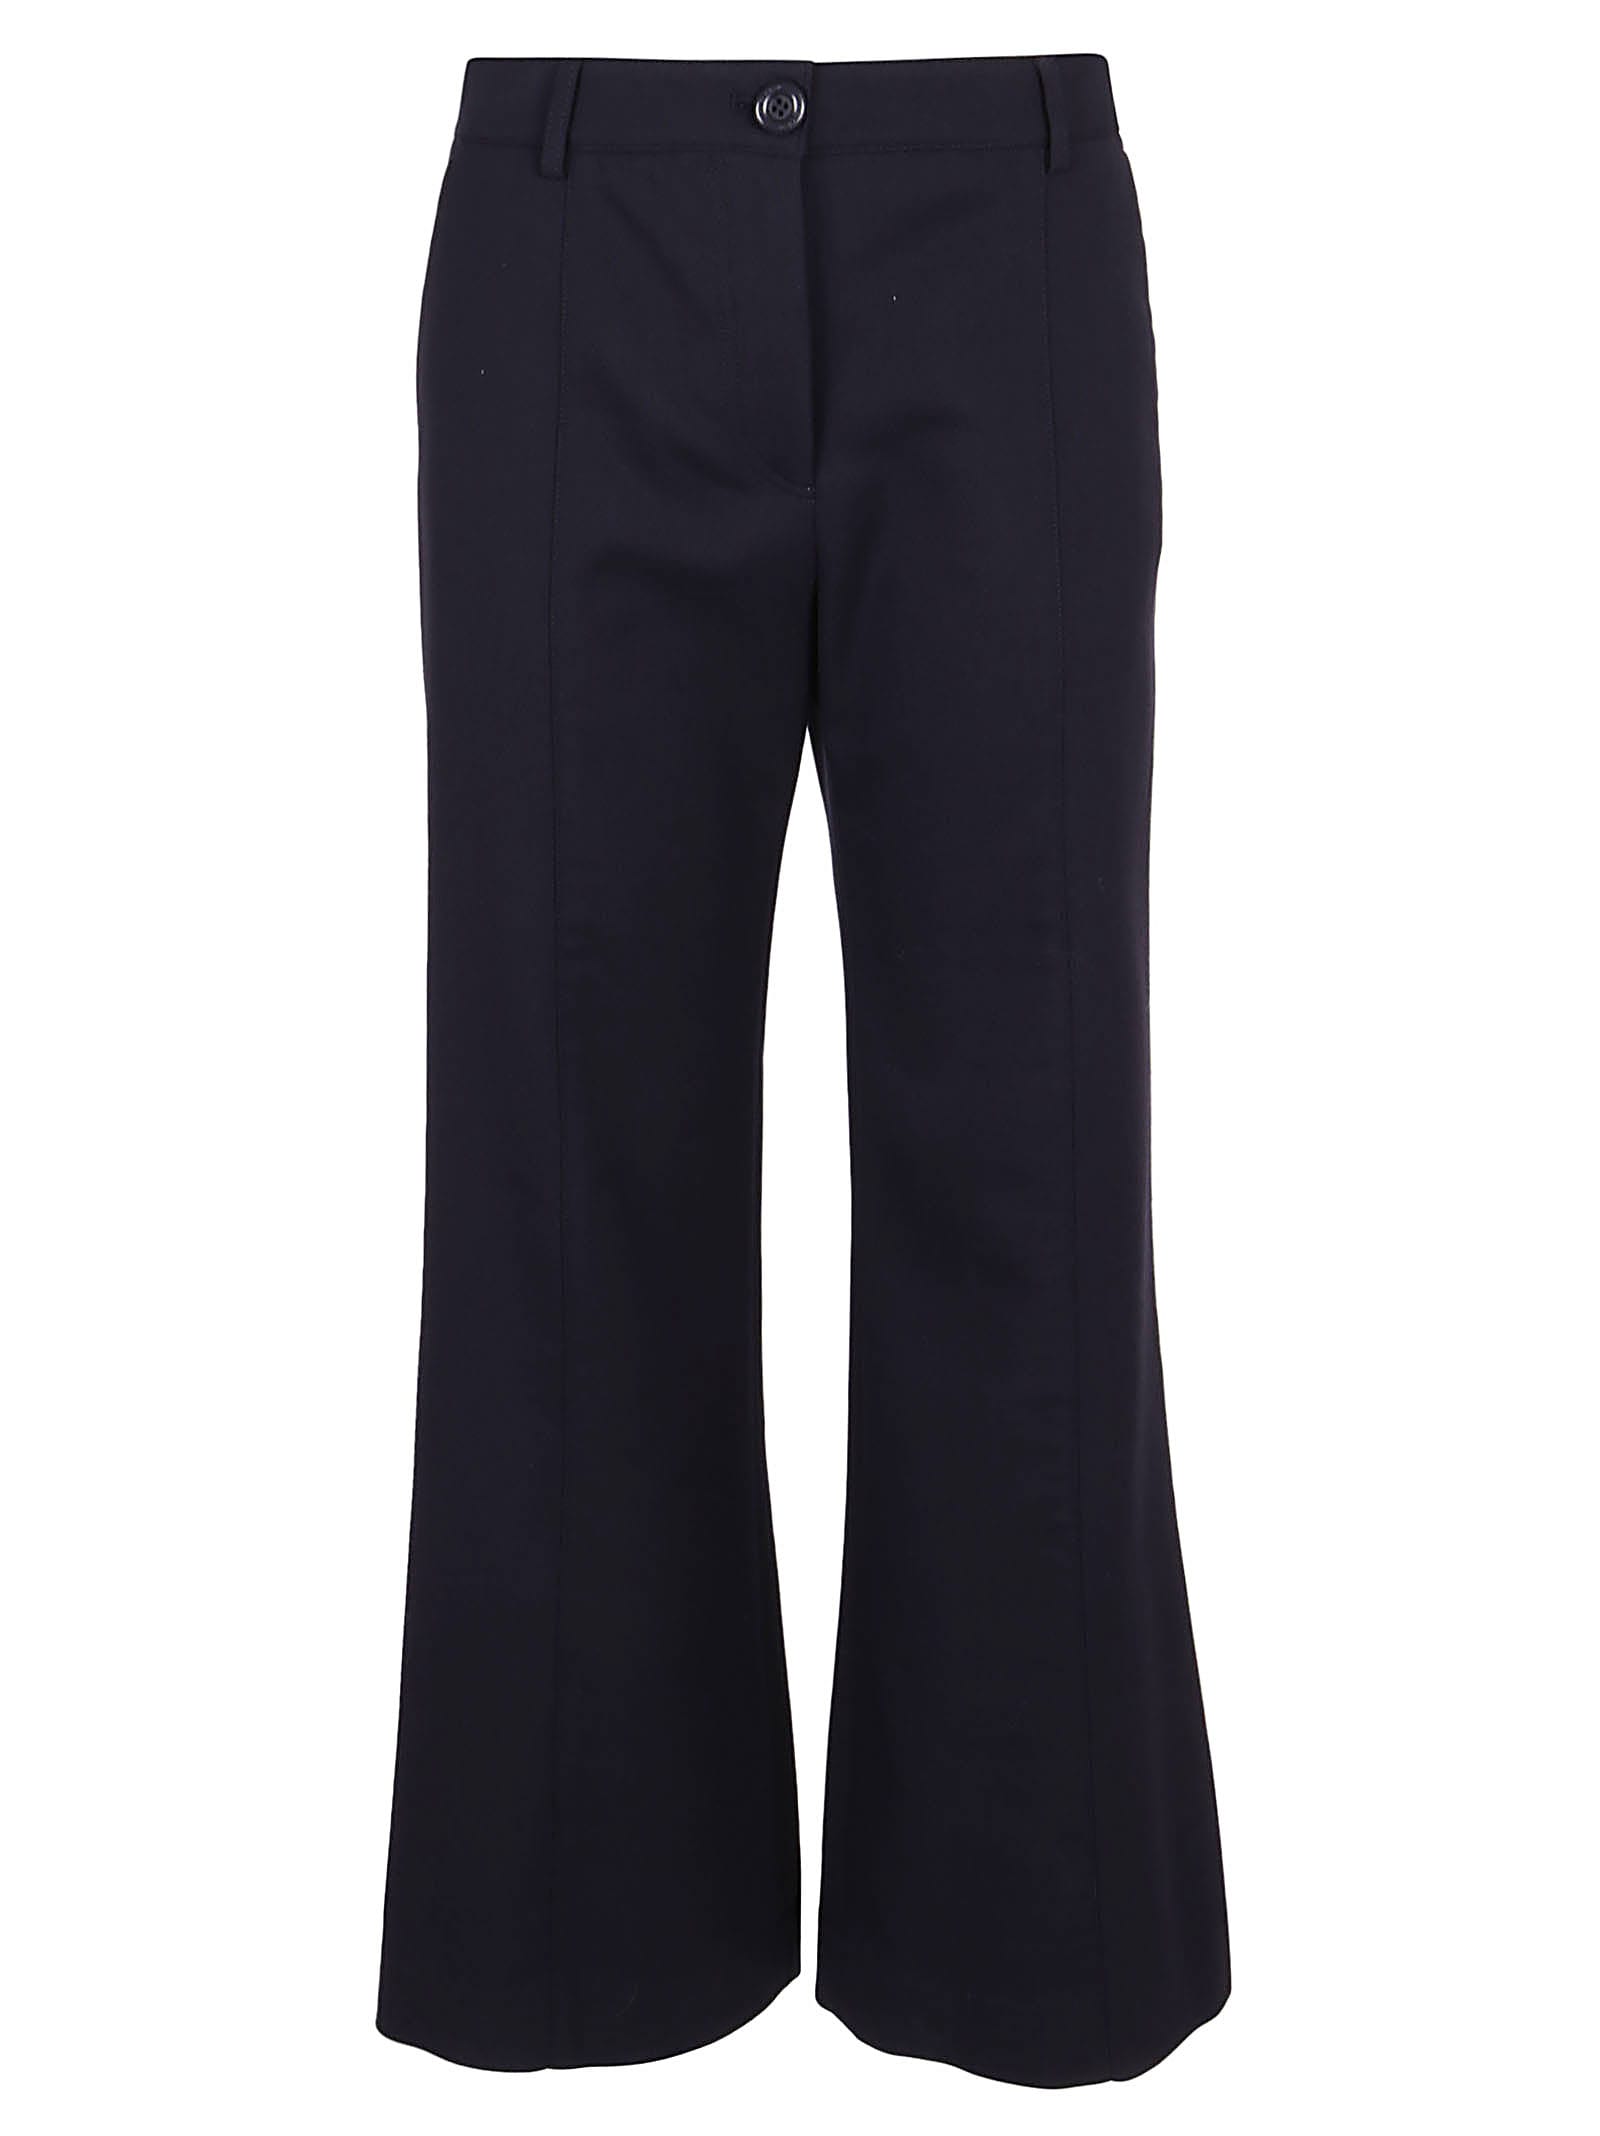 See by Chloé Cotton Mix Tailoring Pants